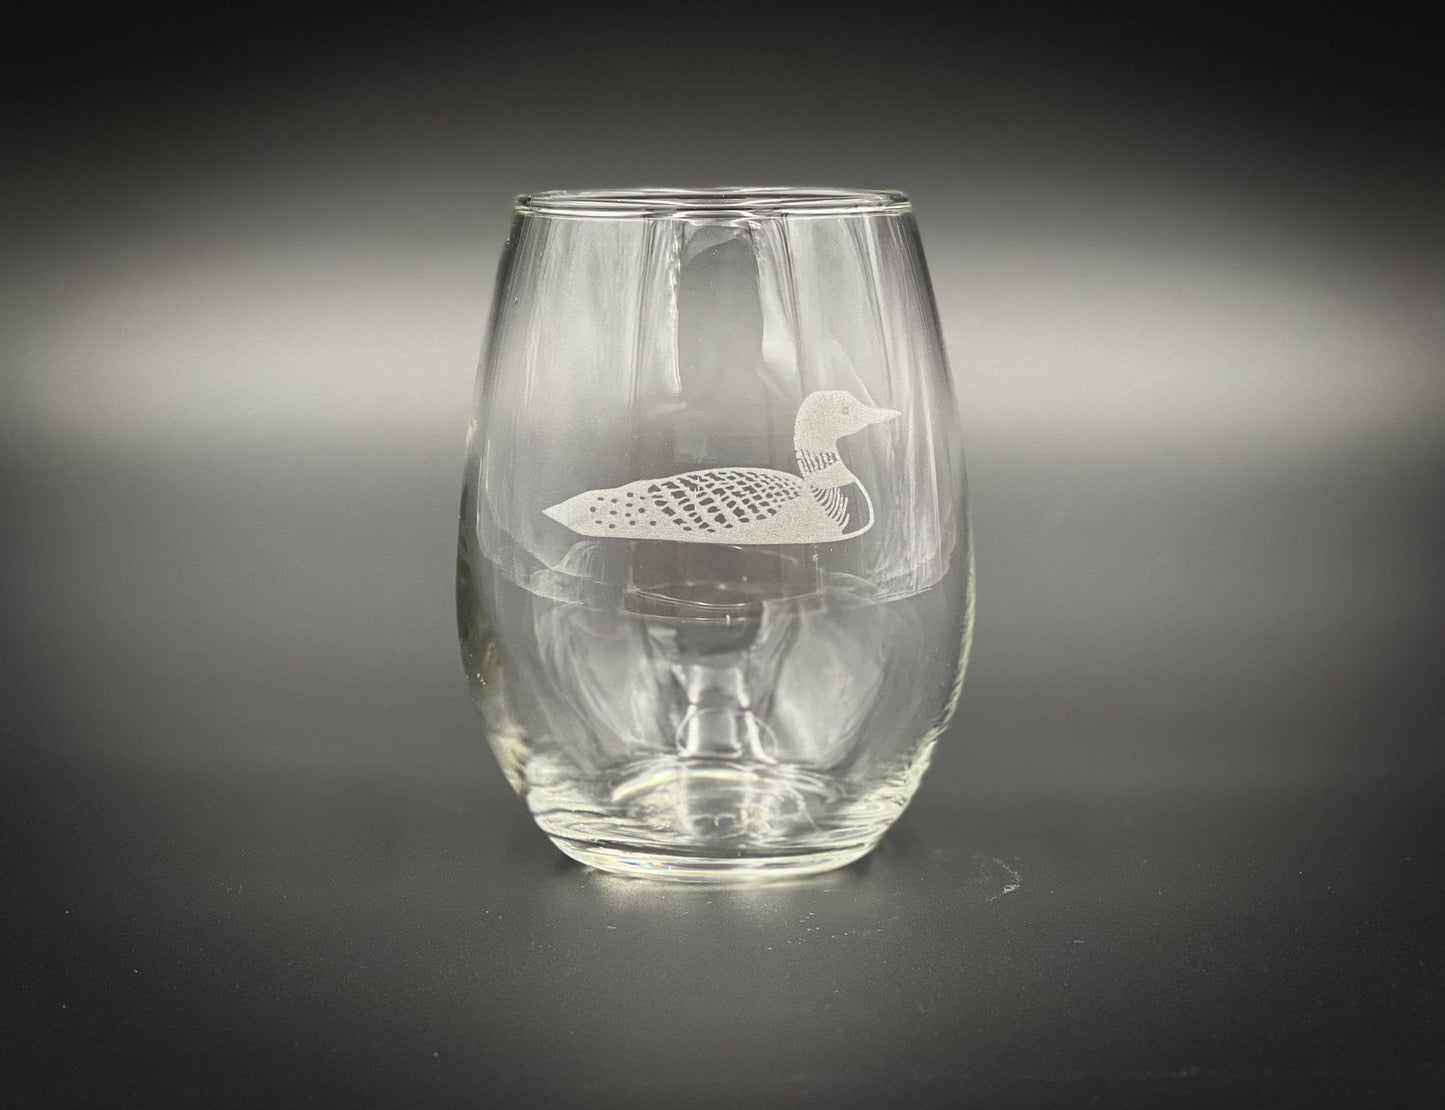 Loon - Etched 15 oz Stemless Wine Glass